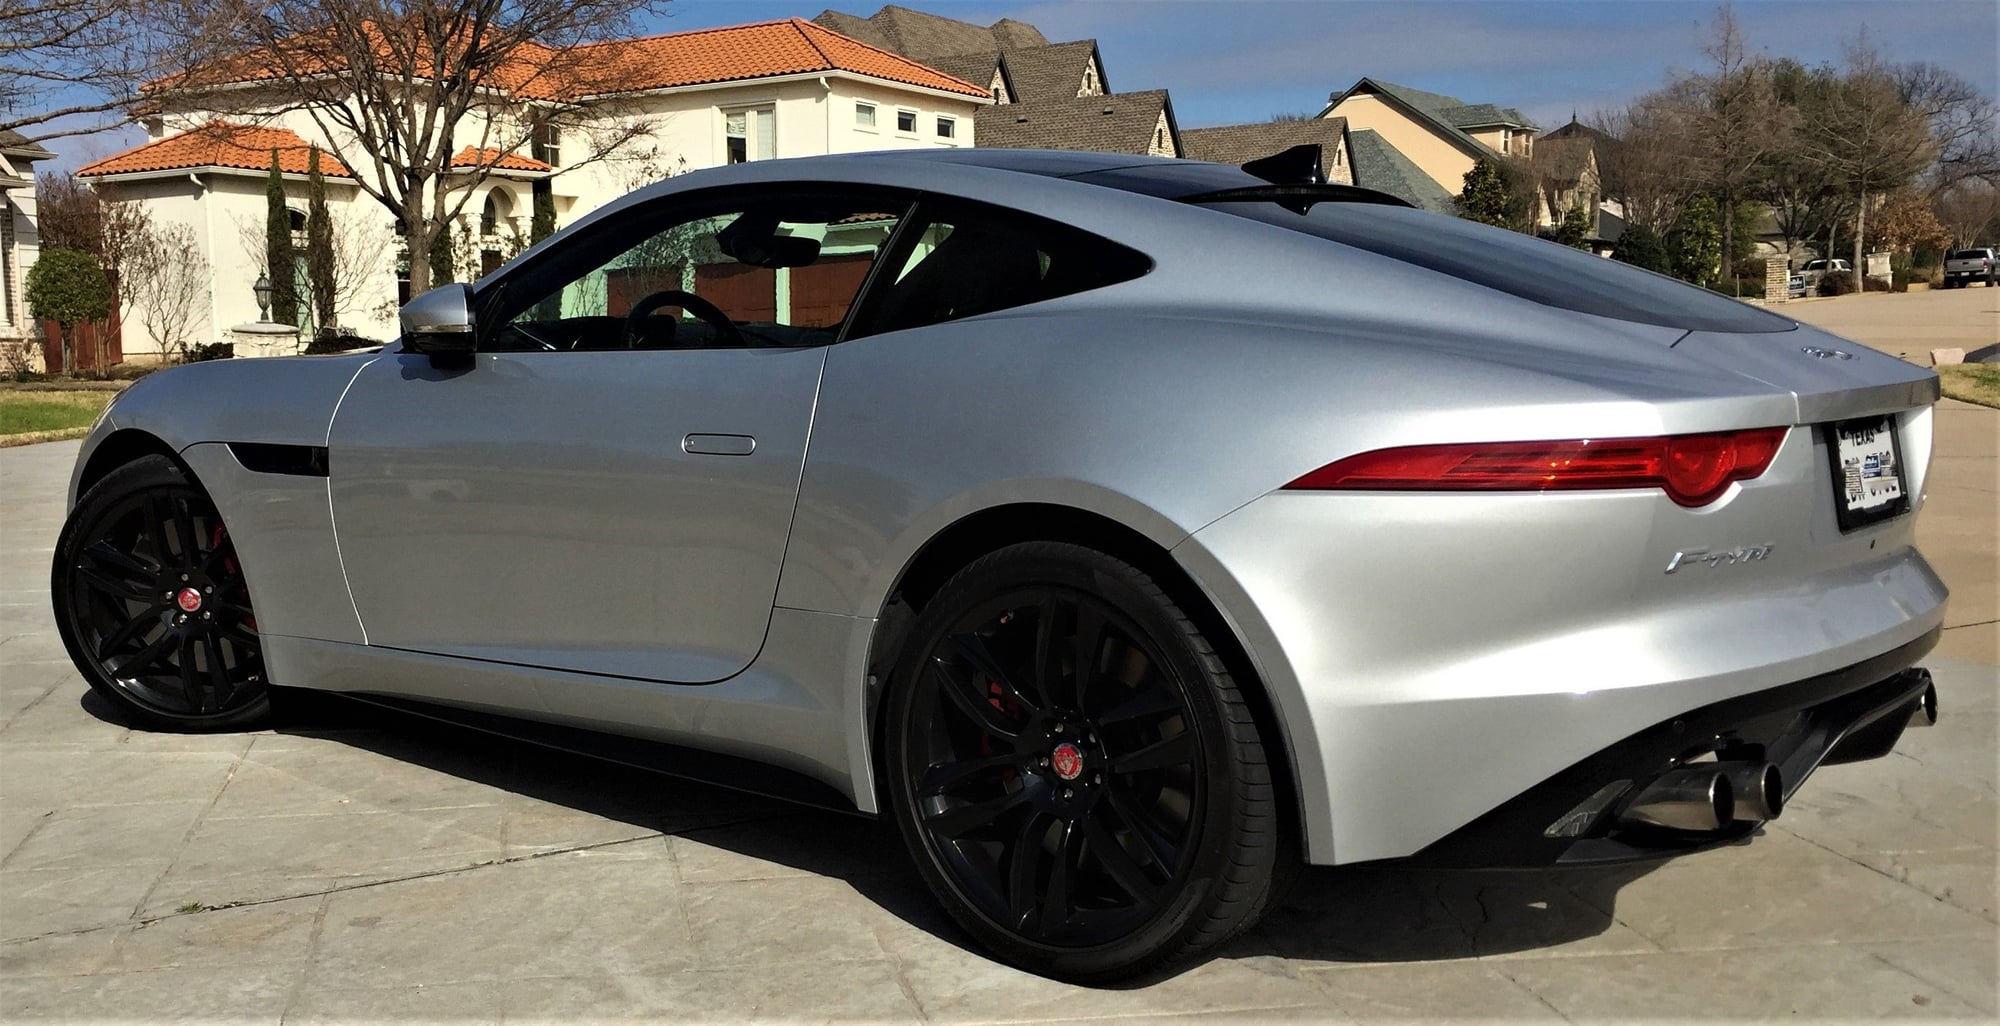 2015 Jaguar F-Type - 2015 Jaguar F-Type R with all of the right options! - Used - VIN SAJWA6DA0FMK15068 - 21,500 Miles - 8 cyl - 2WD - Automatic - Coupe - Silver - Garland, TX 75044, United States